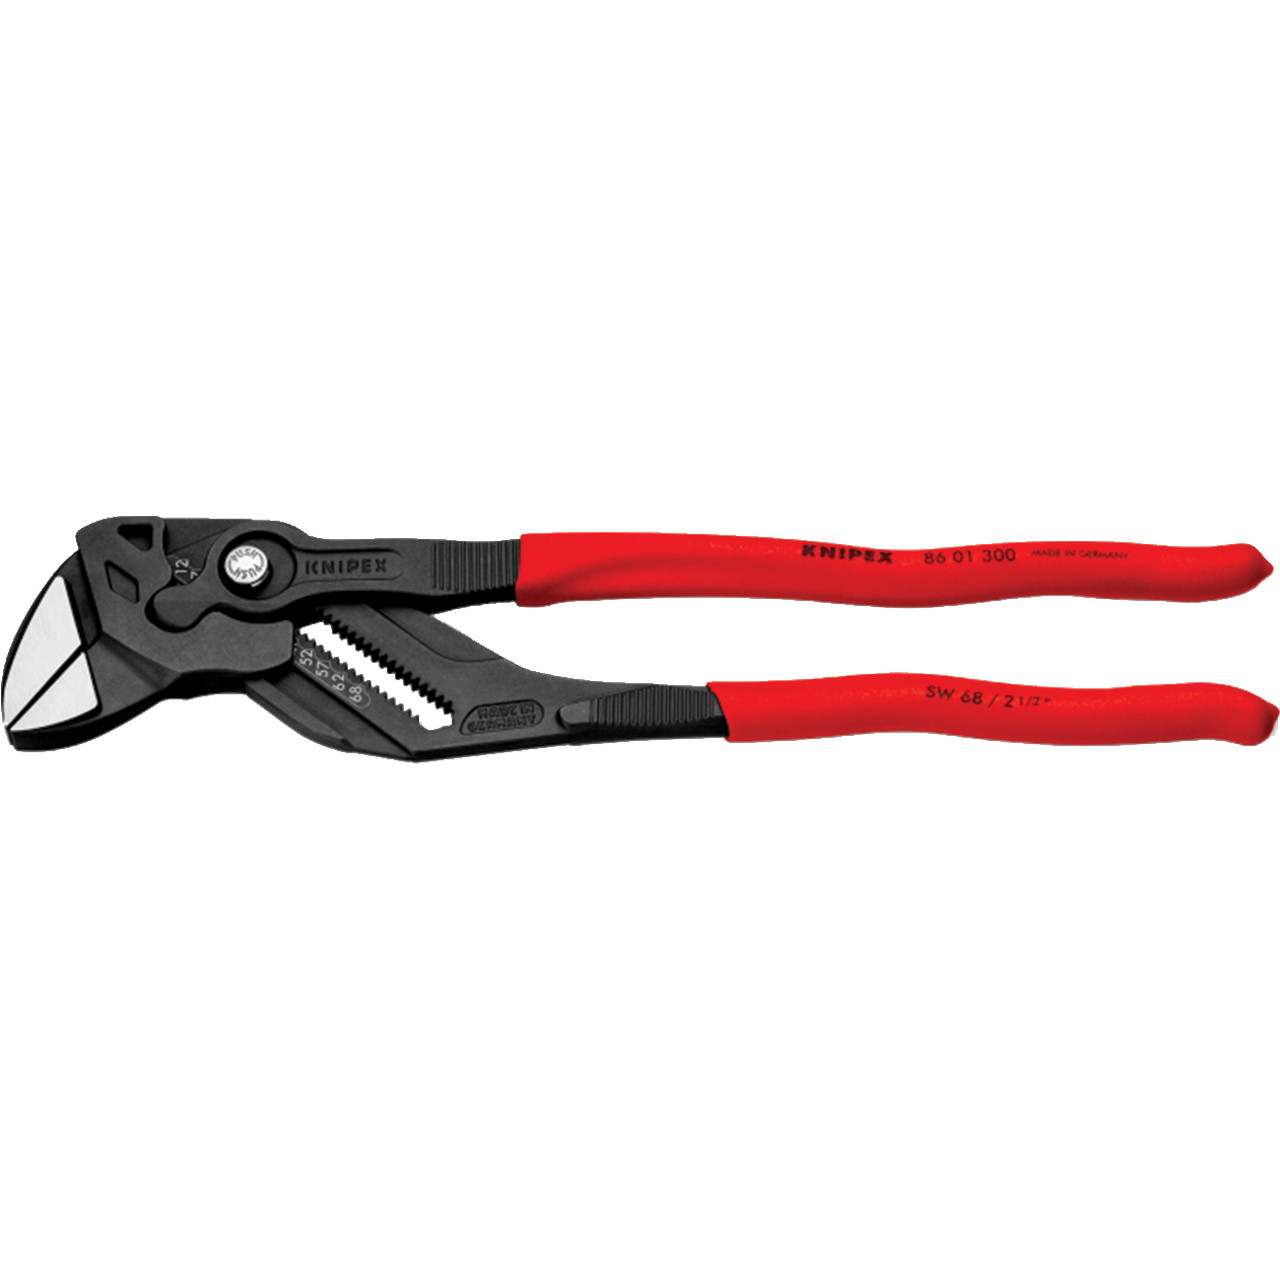 Knipex 8601300SBA 12 Pliers Wrench